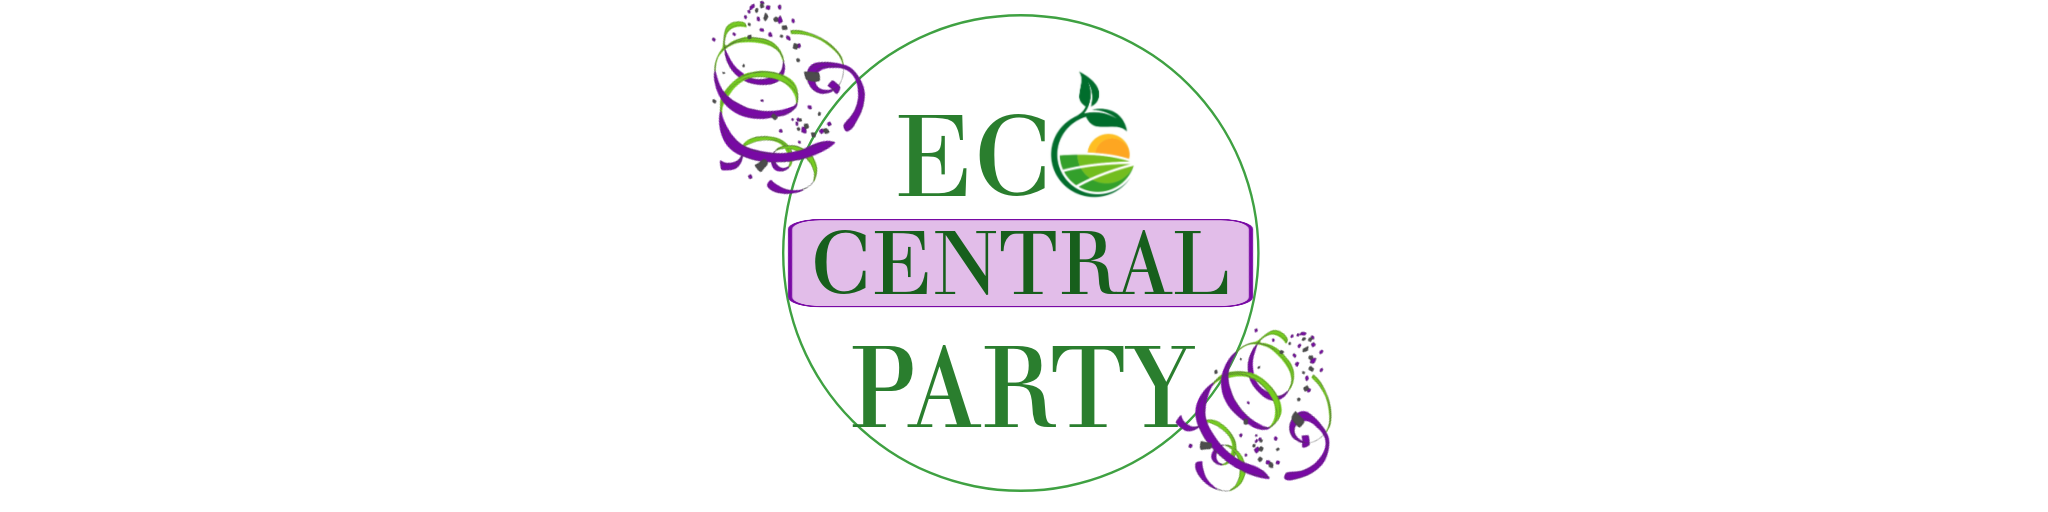 Eco Party Central